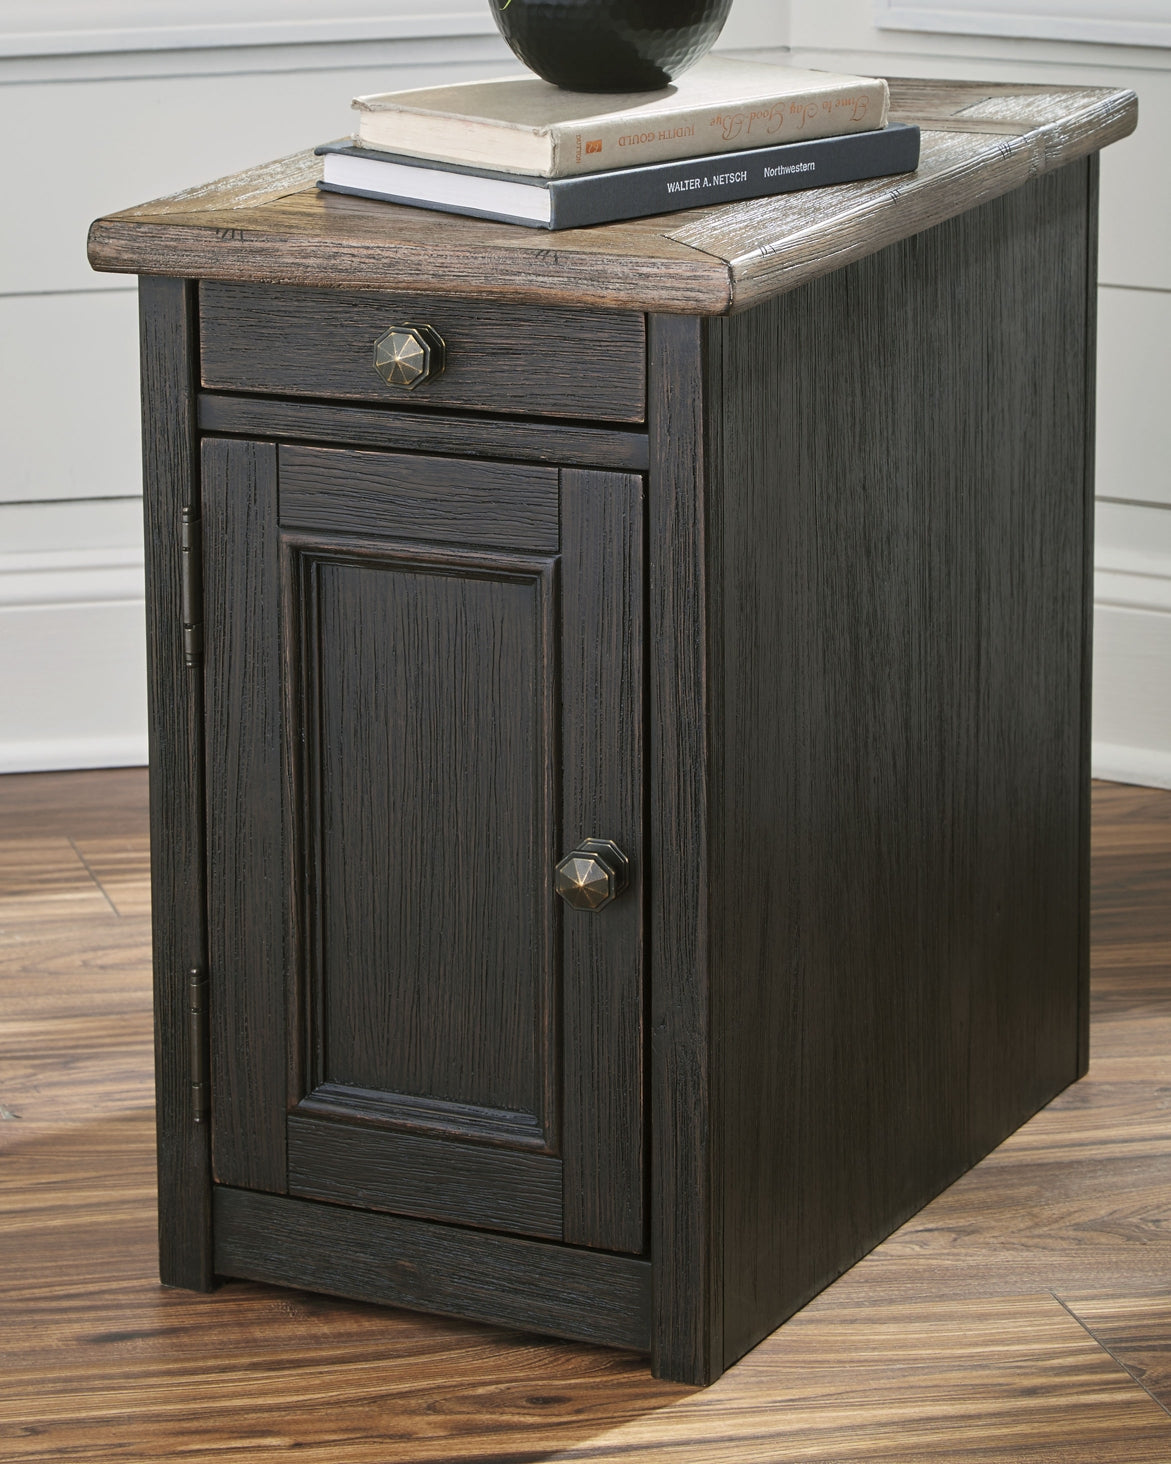 Tyler Creek 2 End Tables Signature Design by Ashley®